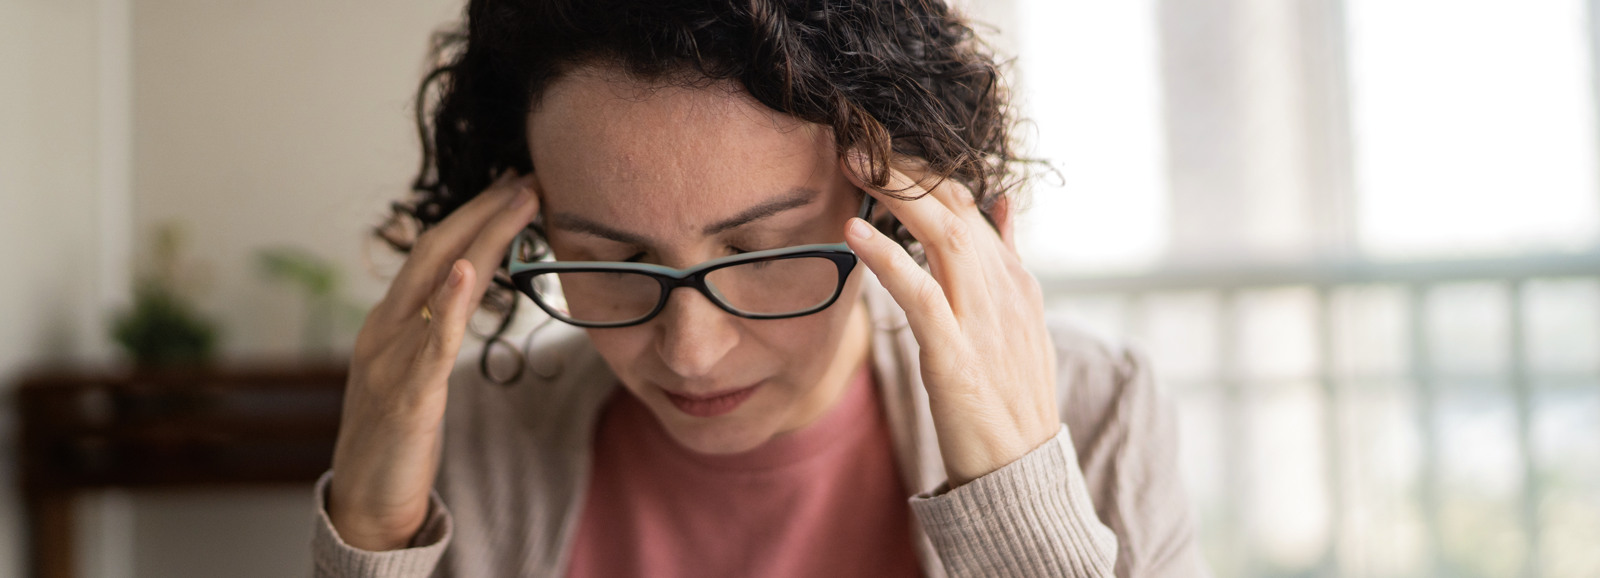 woman-with-glasses-thinking-1600x578.png